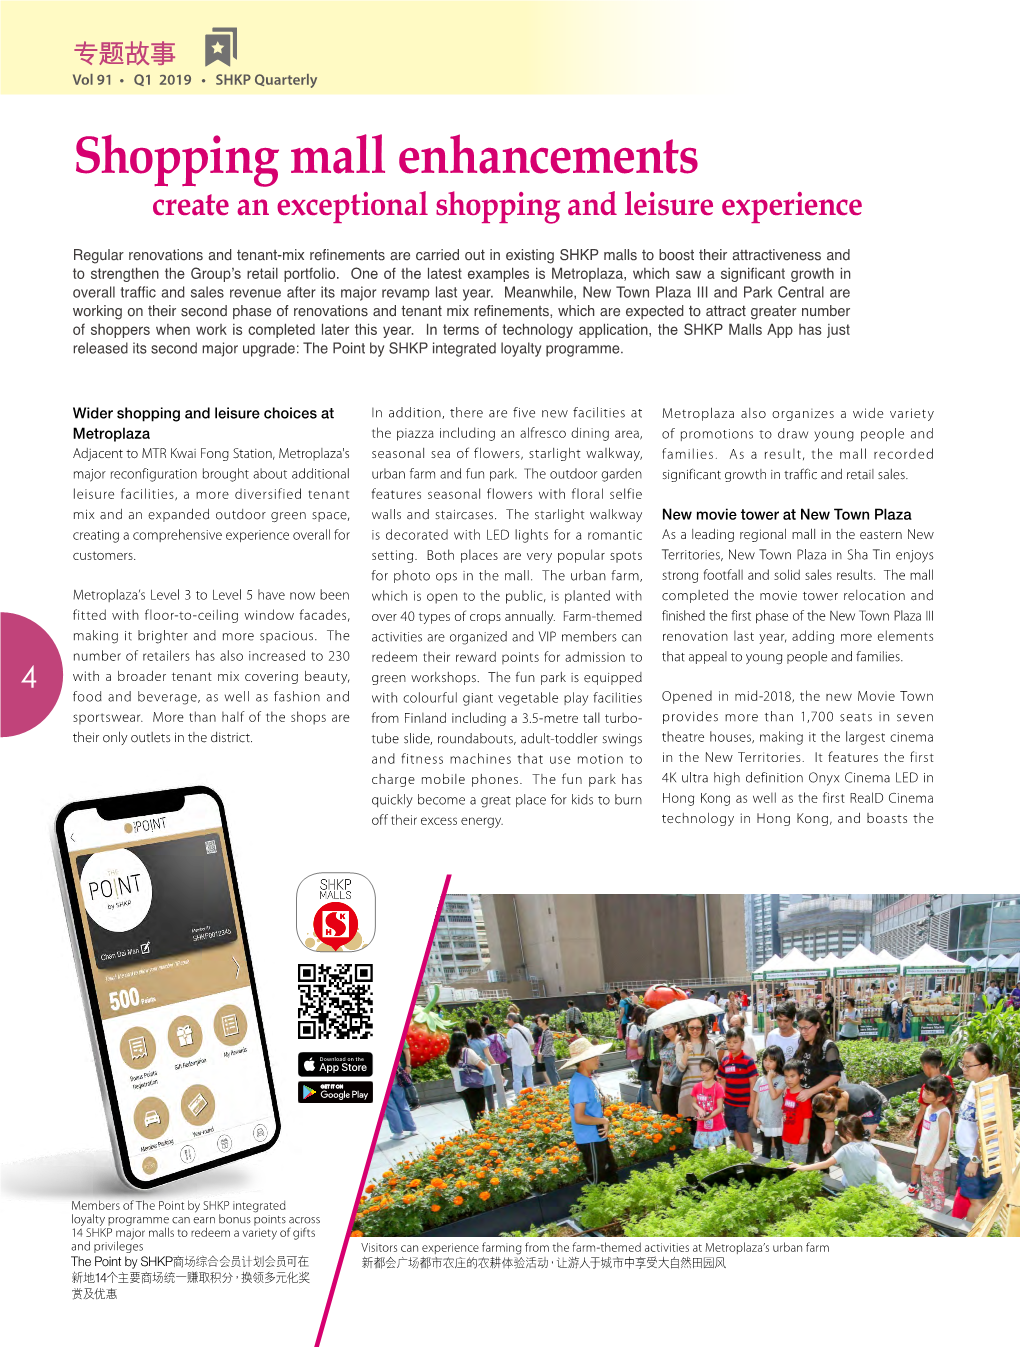 Shopping Mall Enhancements Create an Exceptional Shopping and Leisure Experience